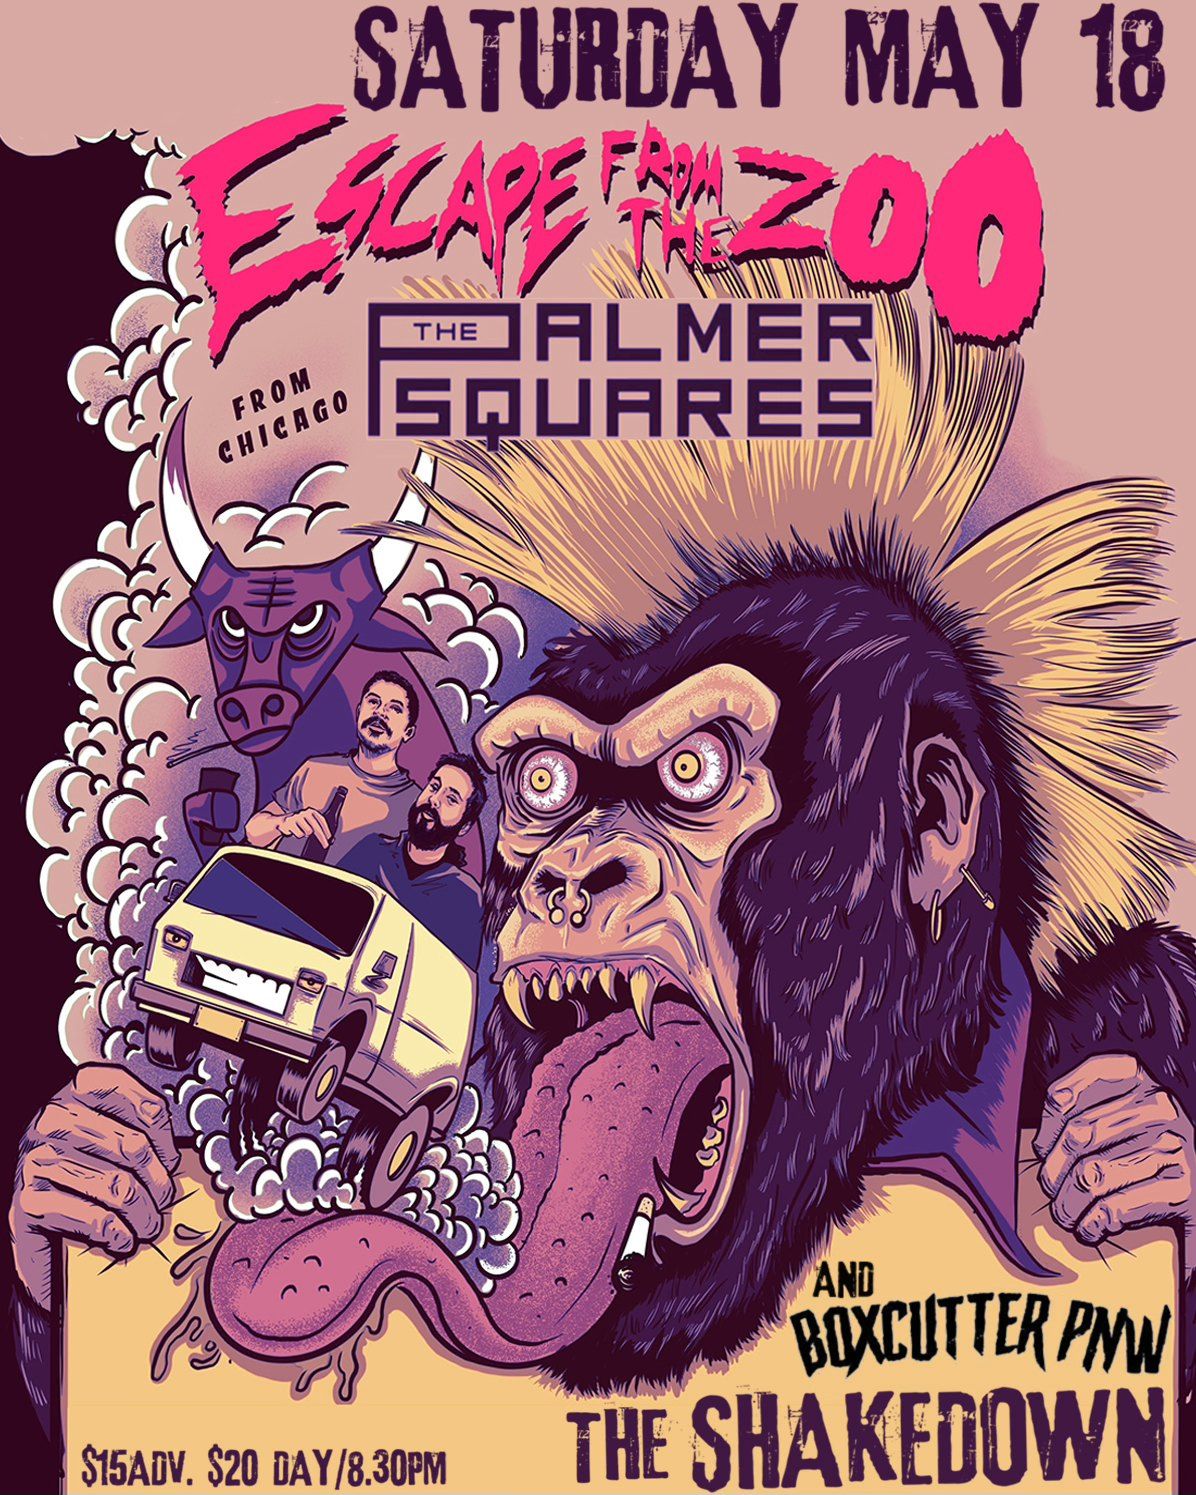 Escape From The ZOO, The Palmer Squares, Boxcutter at The Shakedown